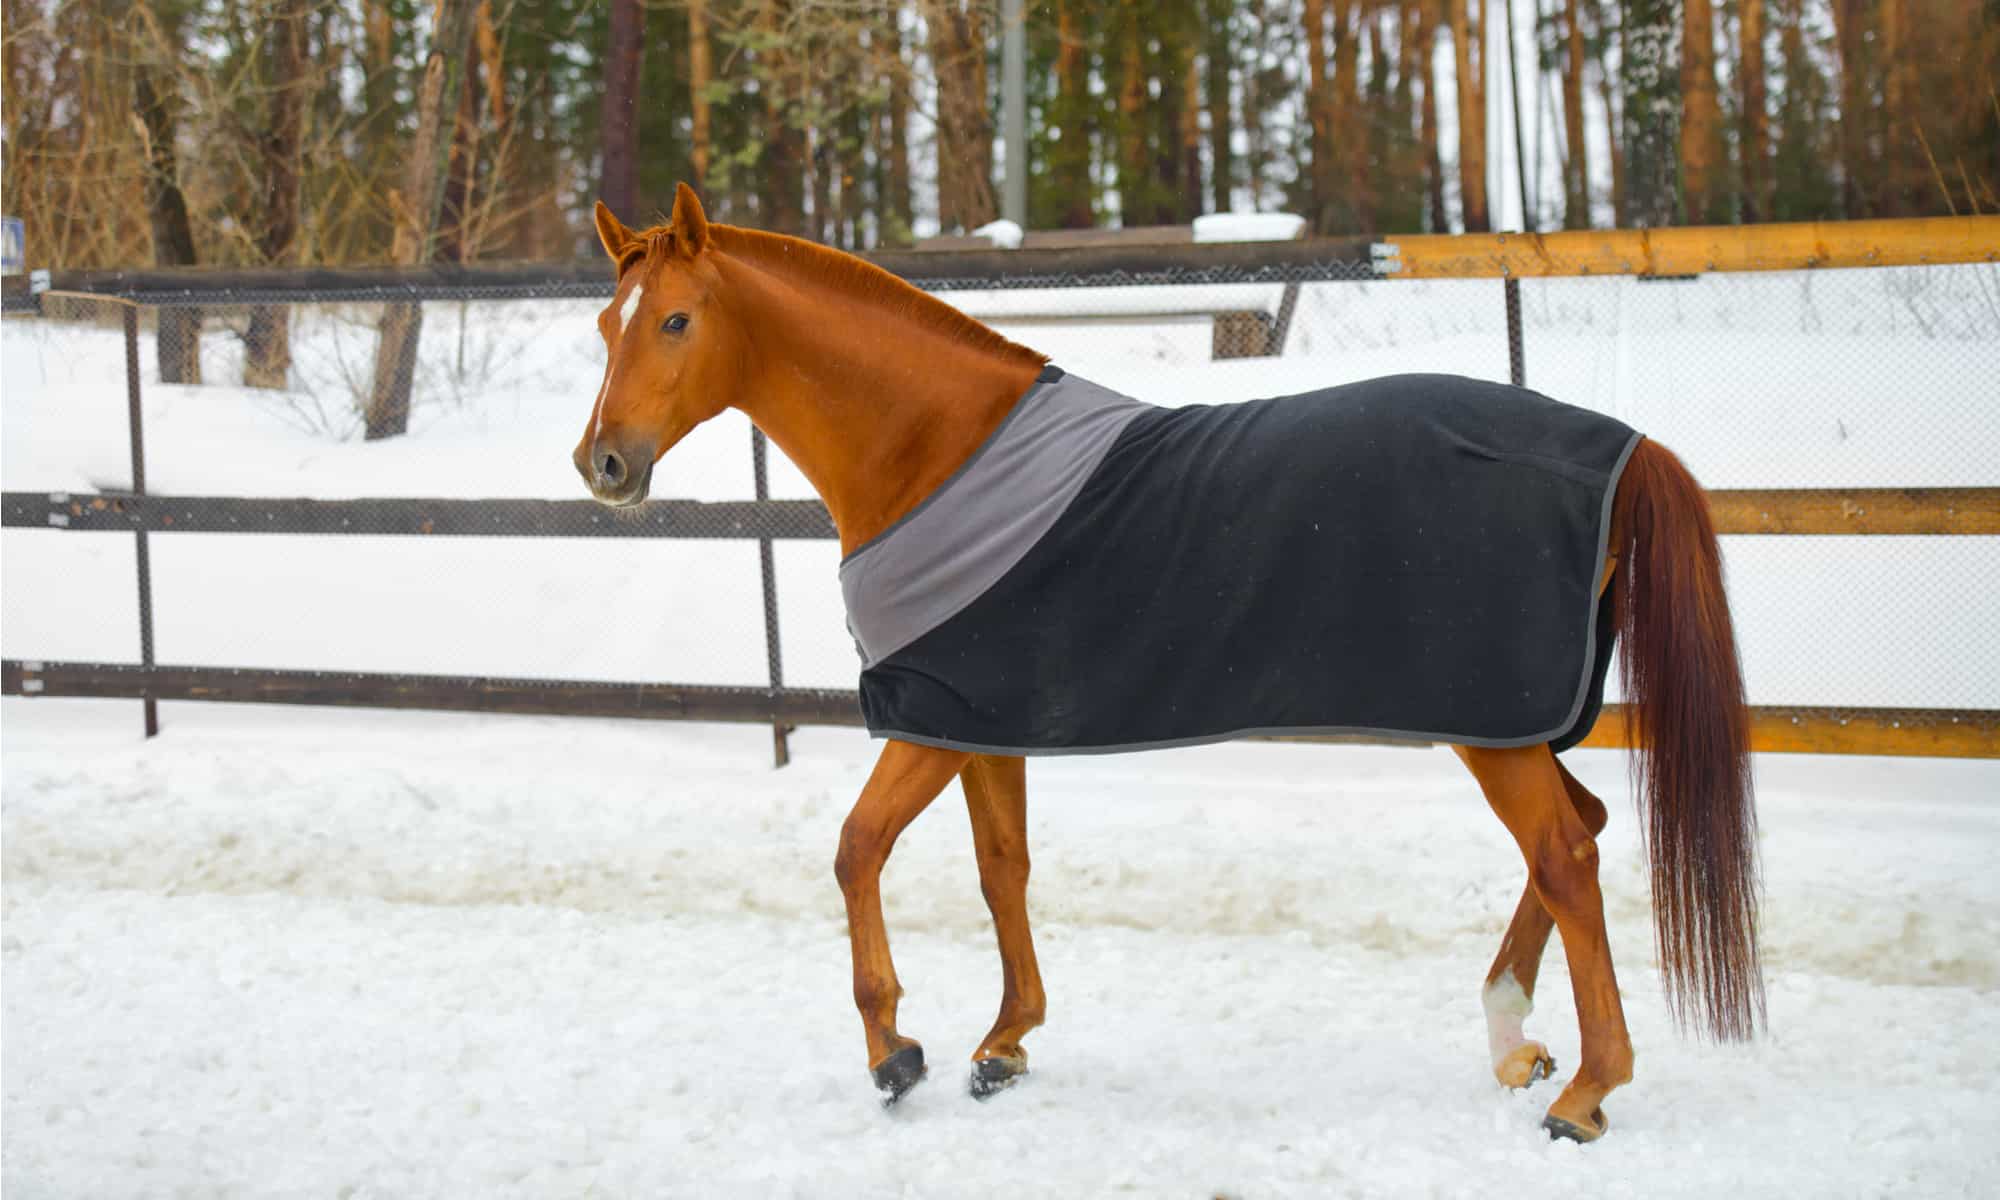 How To Measure For Horse Blanket